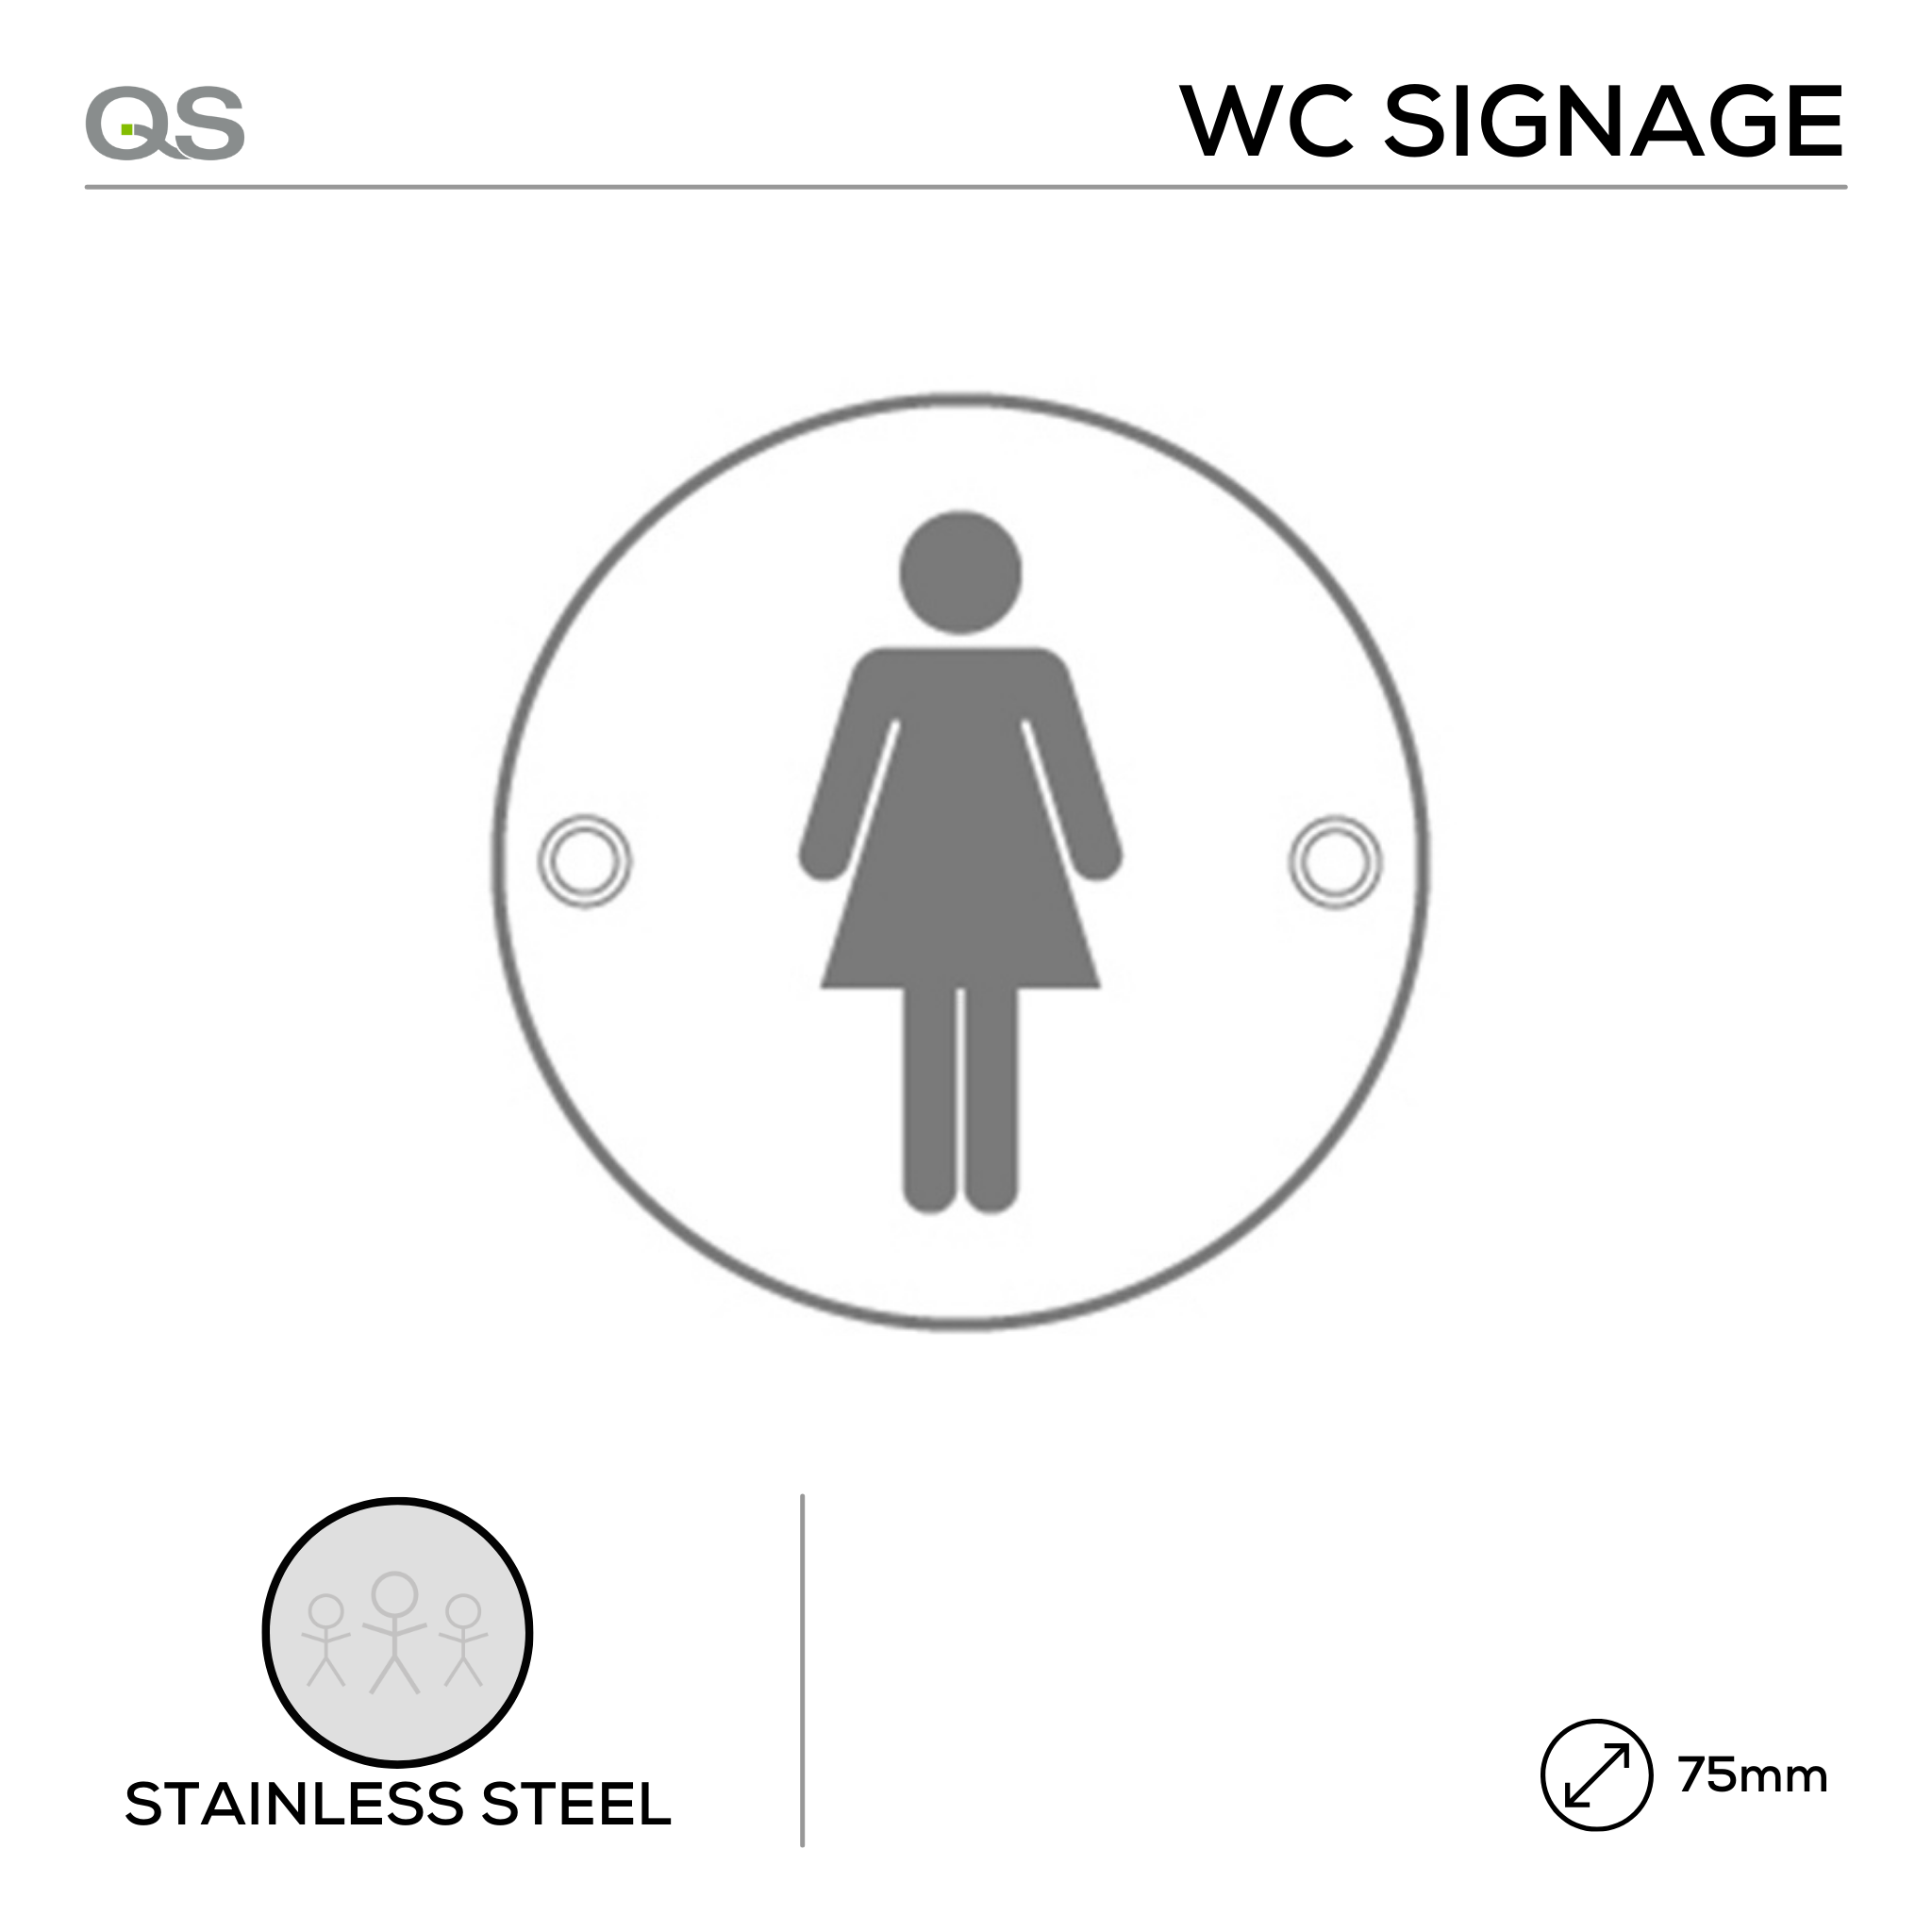 QS4502, Female, Round Engraved Sign, 75mm x 75mm, Stainless Steel, QS